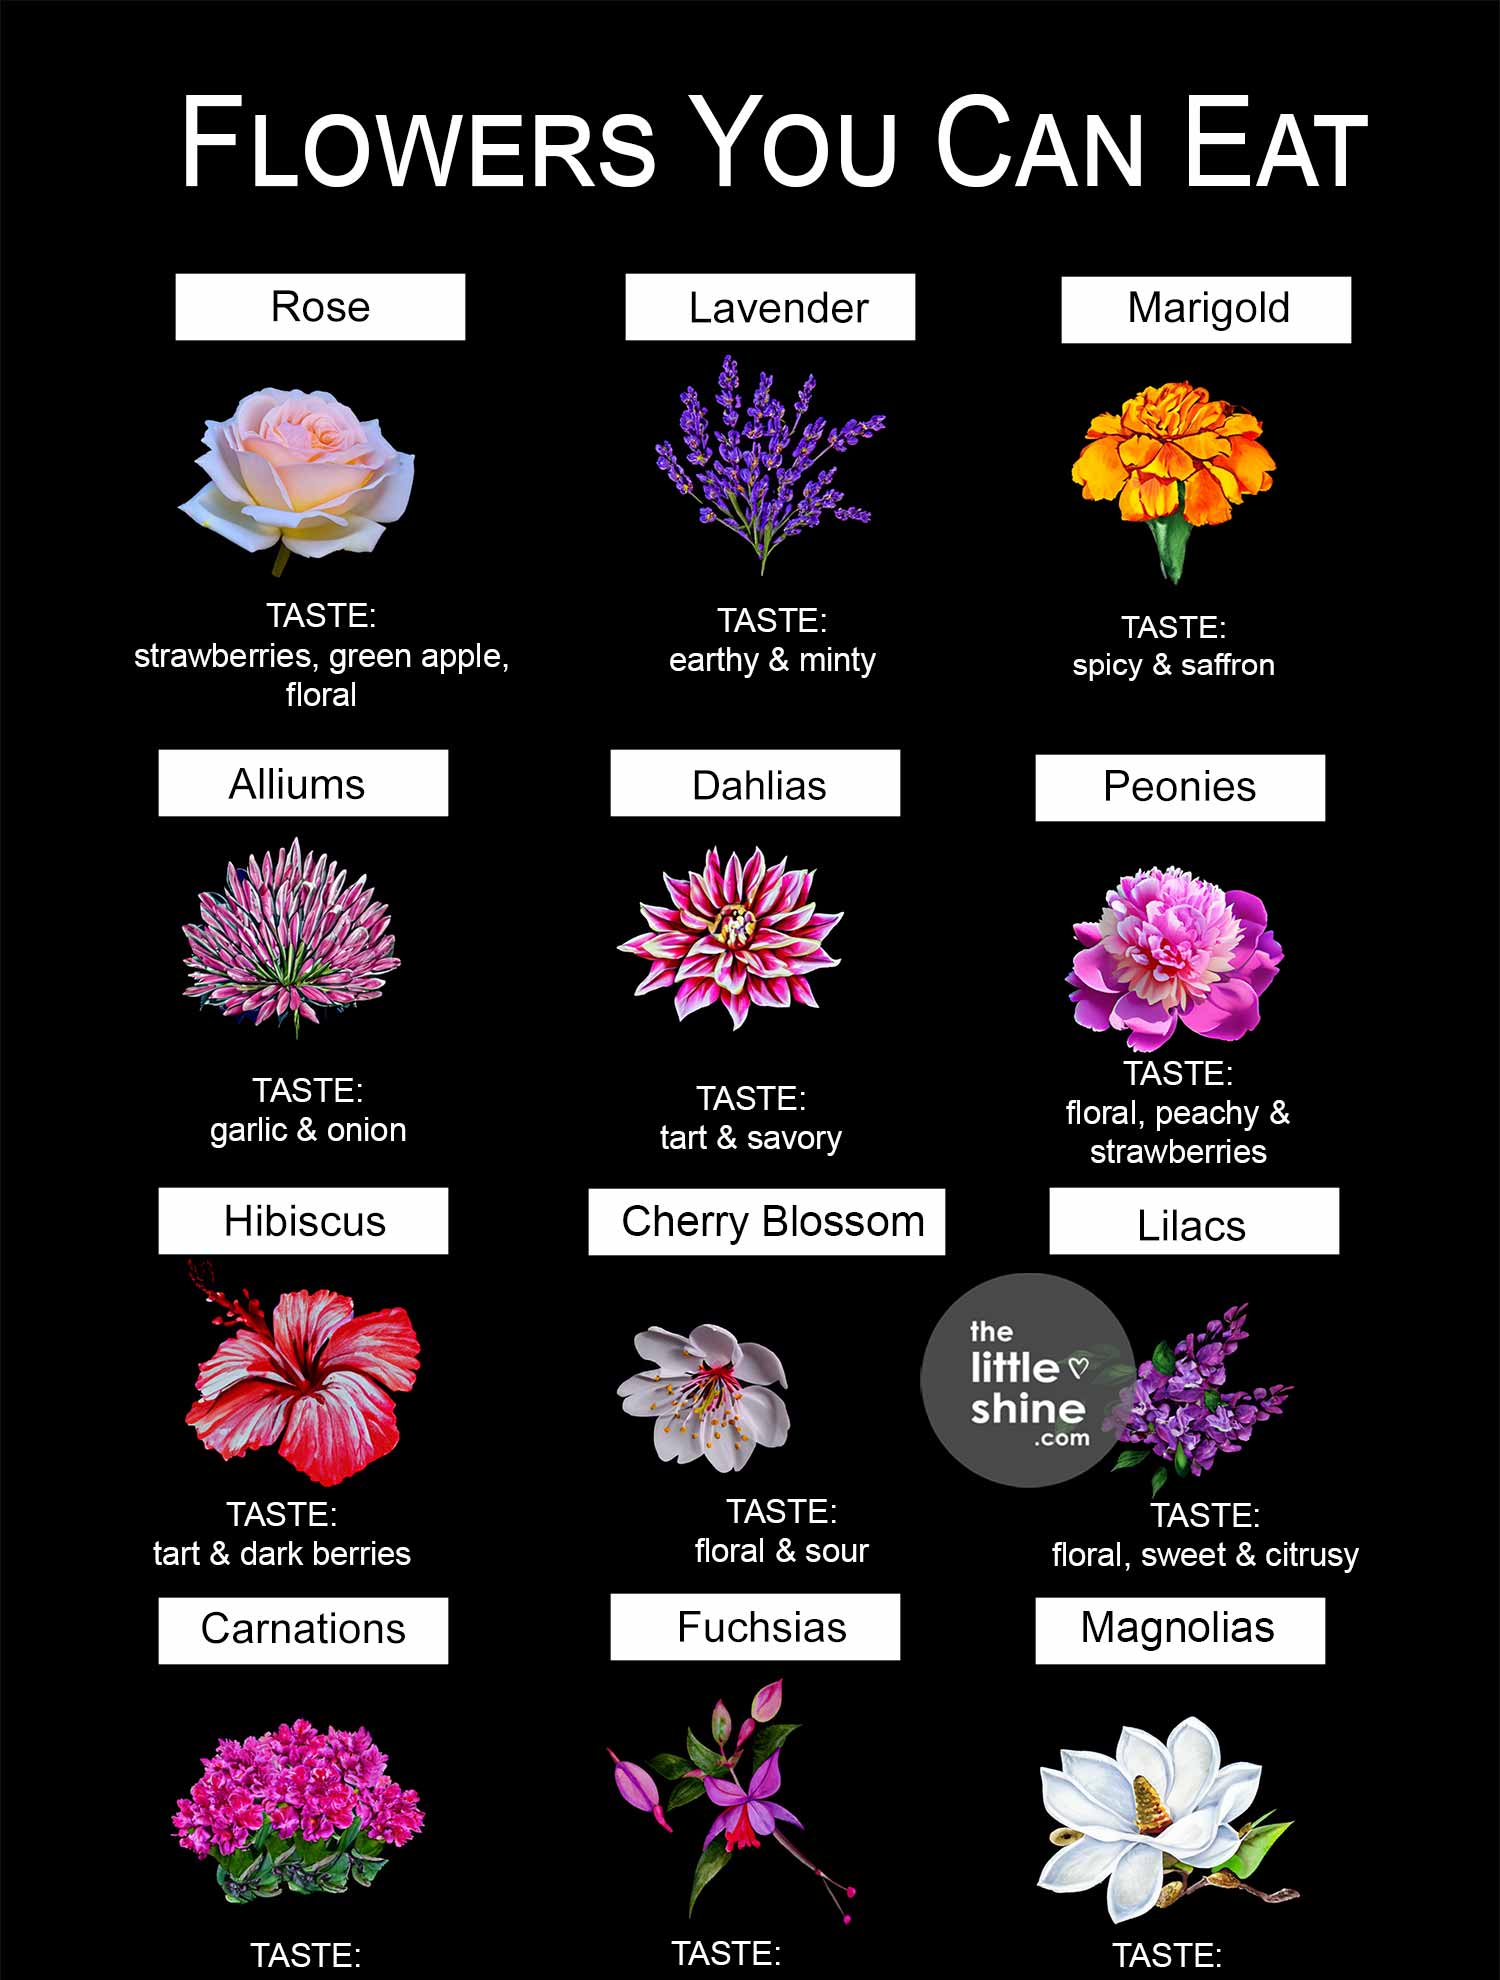 Types of Edible Flowers - Flavor and Ways to Use Them